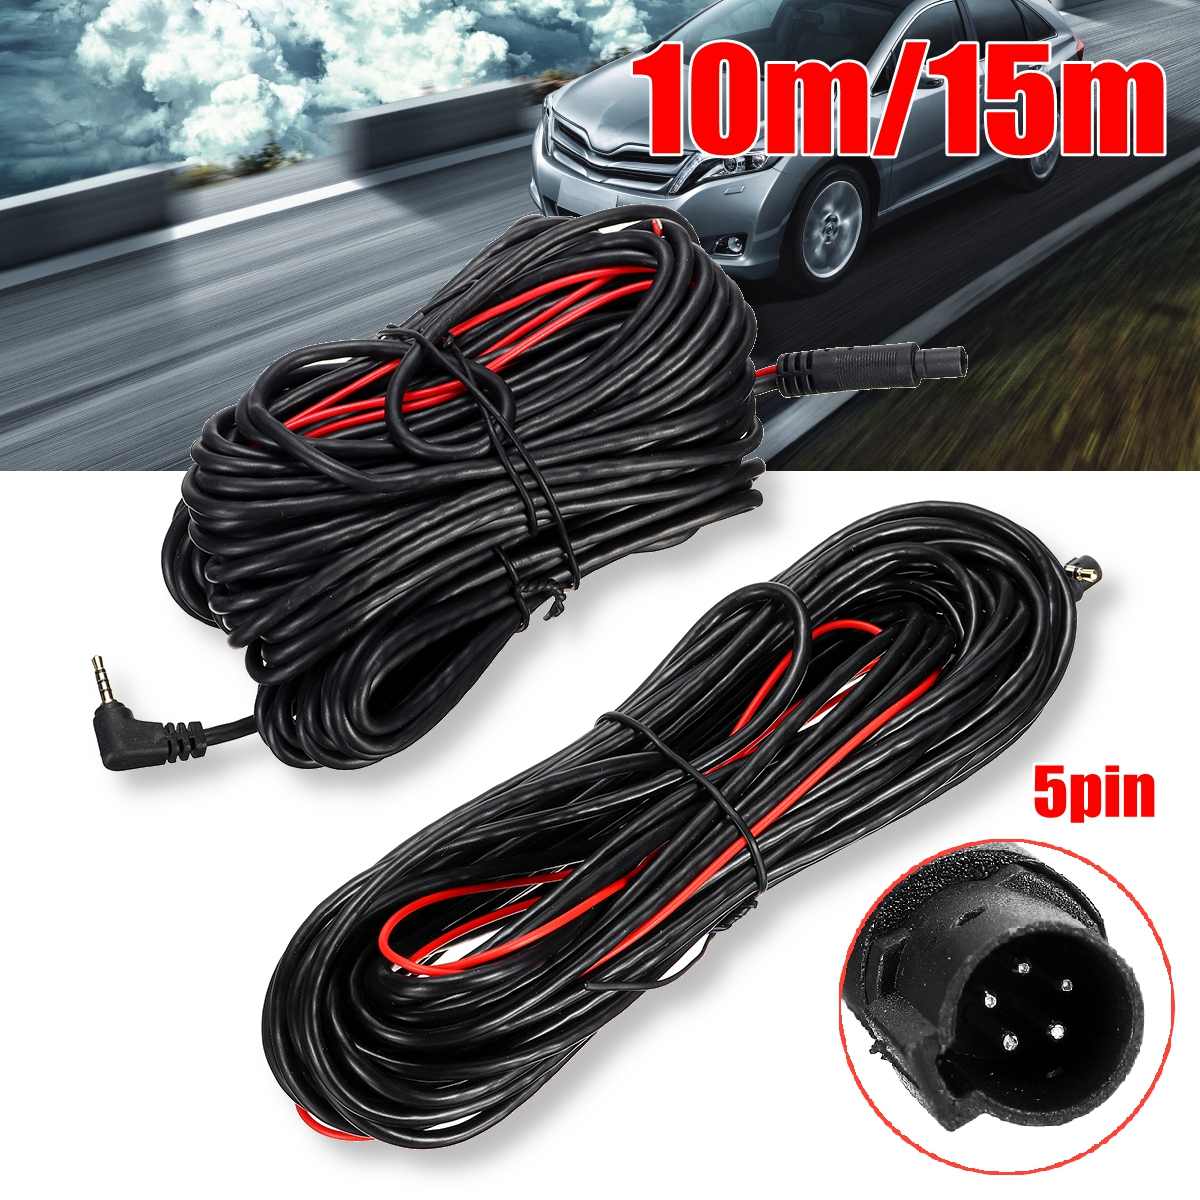 Car Recorder Cable Car Rear View Backup Camera Reverse 2.5mm to 5 Pin Extension Cord 10M 